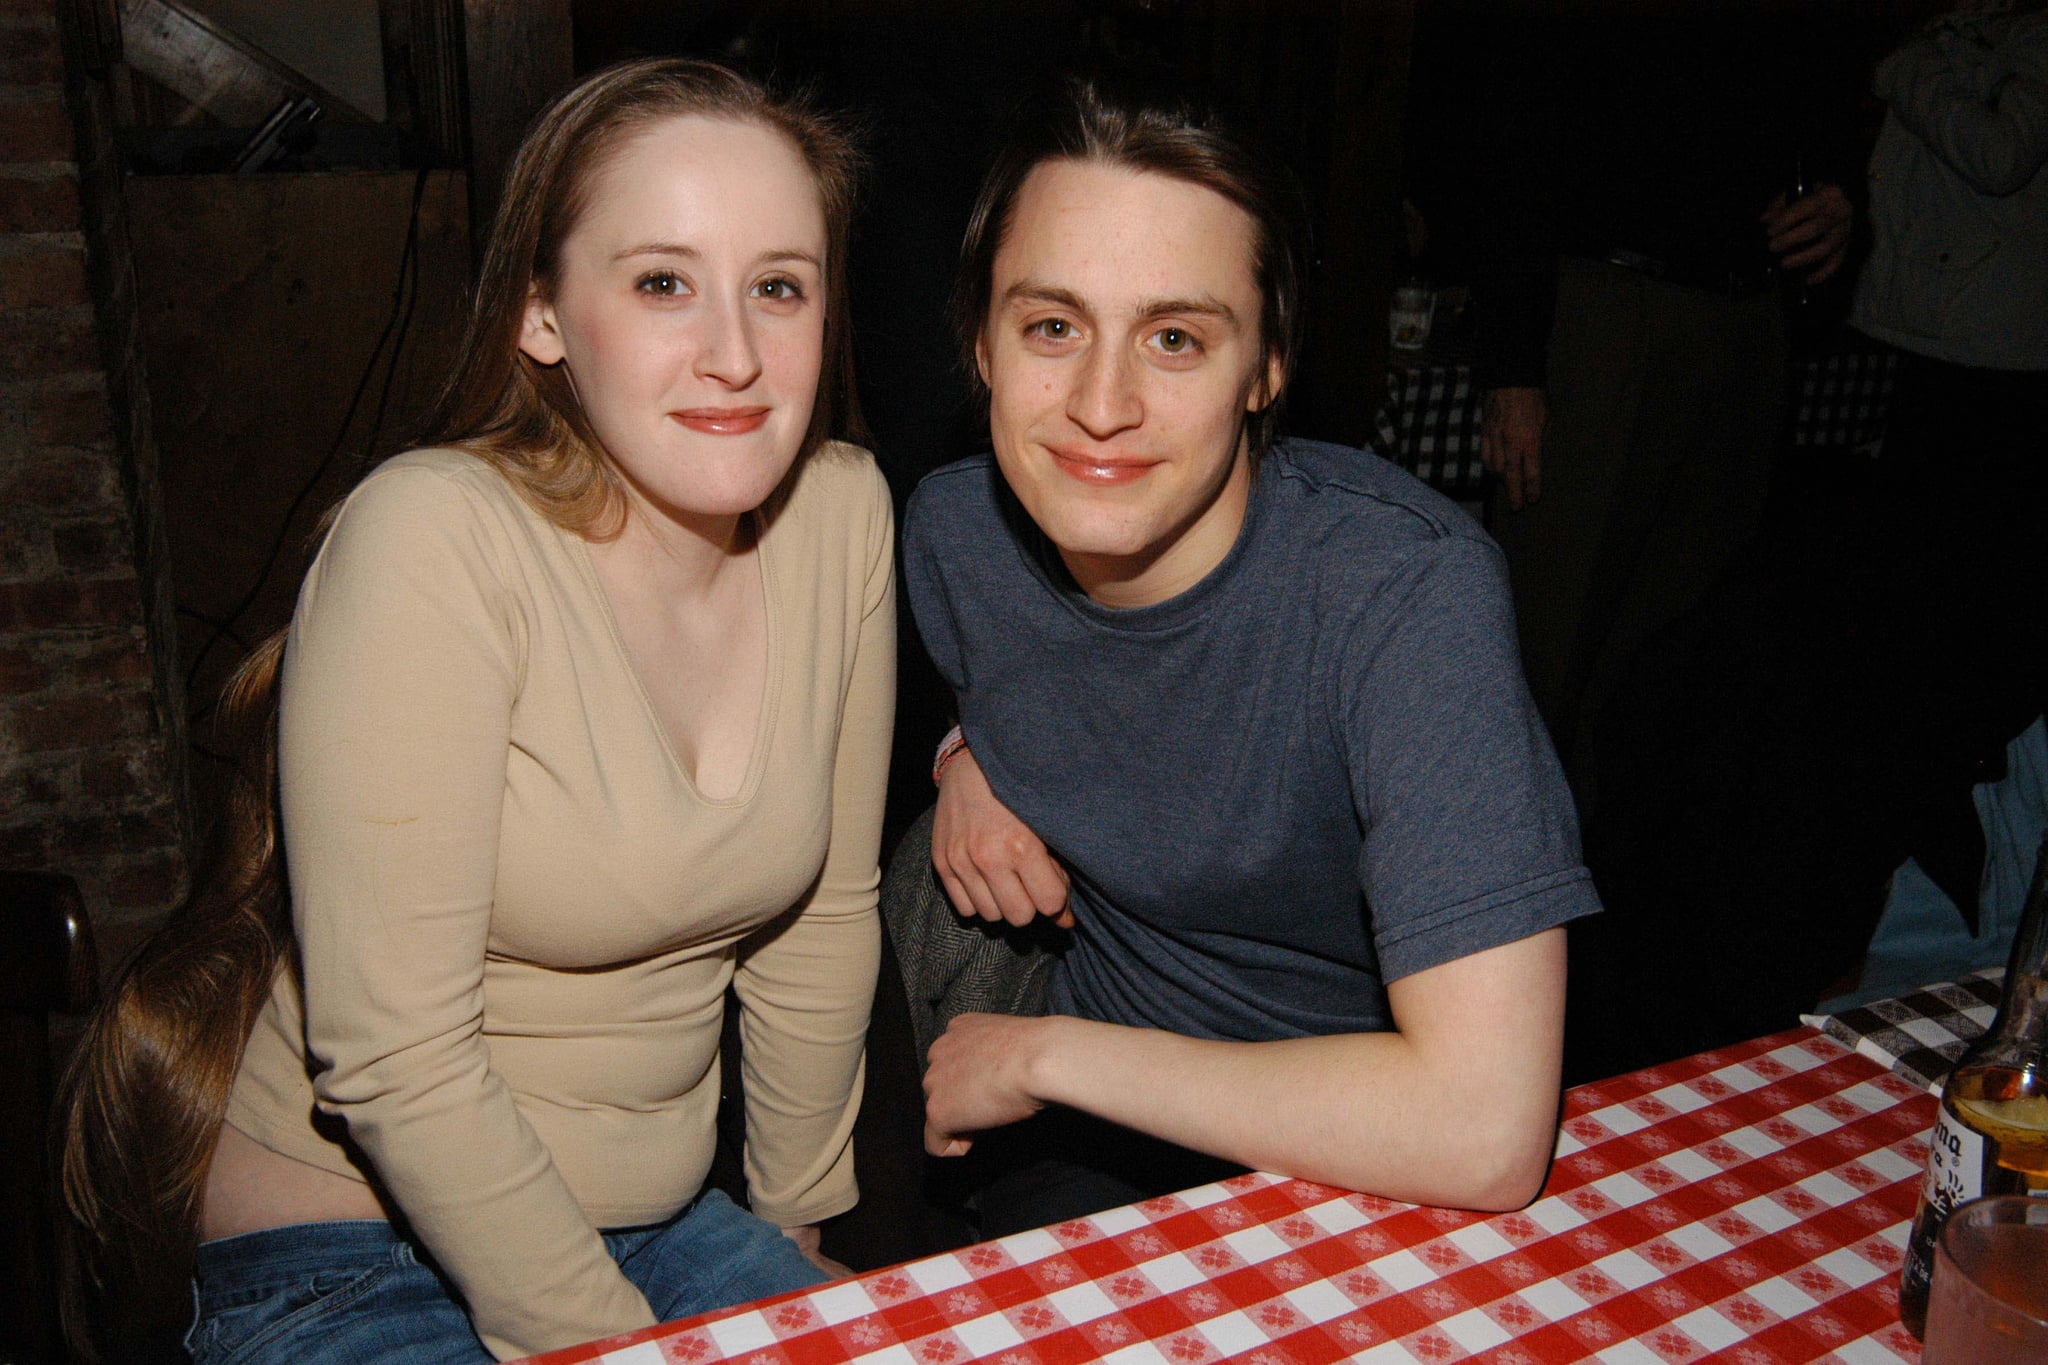 NEW YORK CITY, NY - JANUARY 11: Quinn Culkin and Kieran Culkin attend OPENING NIGHT PARTY FOR Second Stage Theatre's production of Theresa Rebeck's THE SCENE at Spanky's BBQ 43rd on January 11, 2007 in New York City. (Photo by  Christopher Porzio/Patrick McMullan via Getty Images)